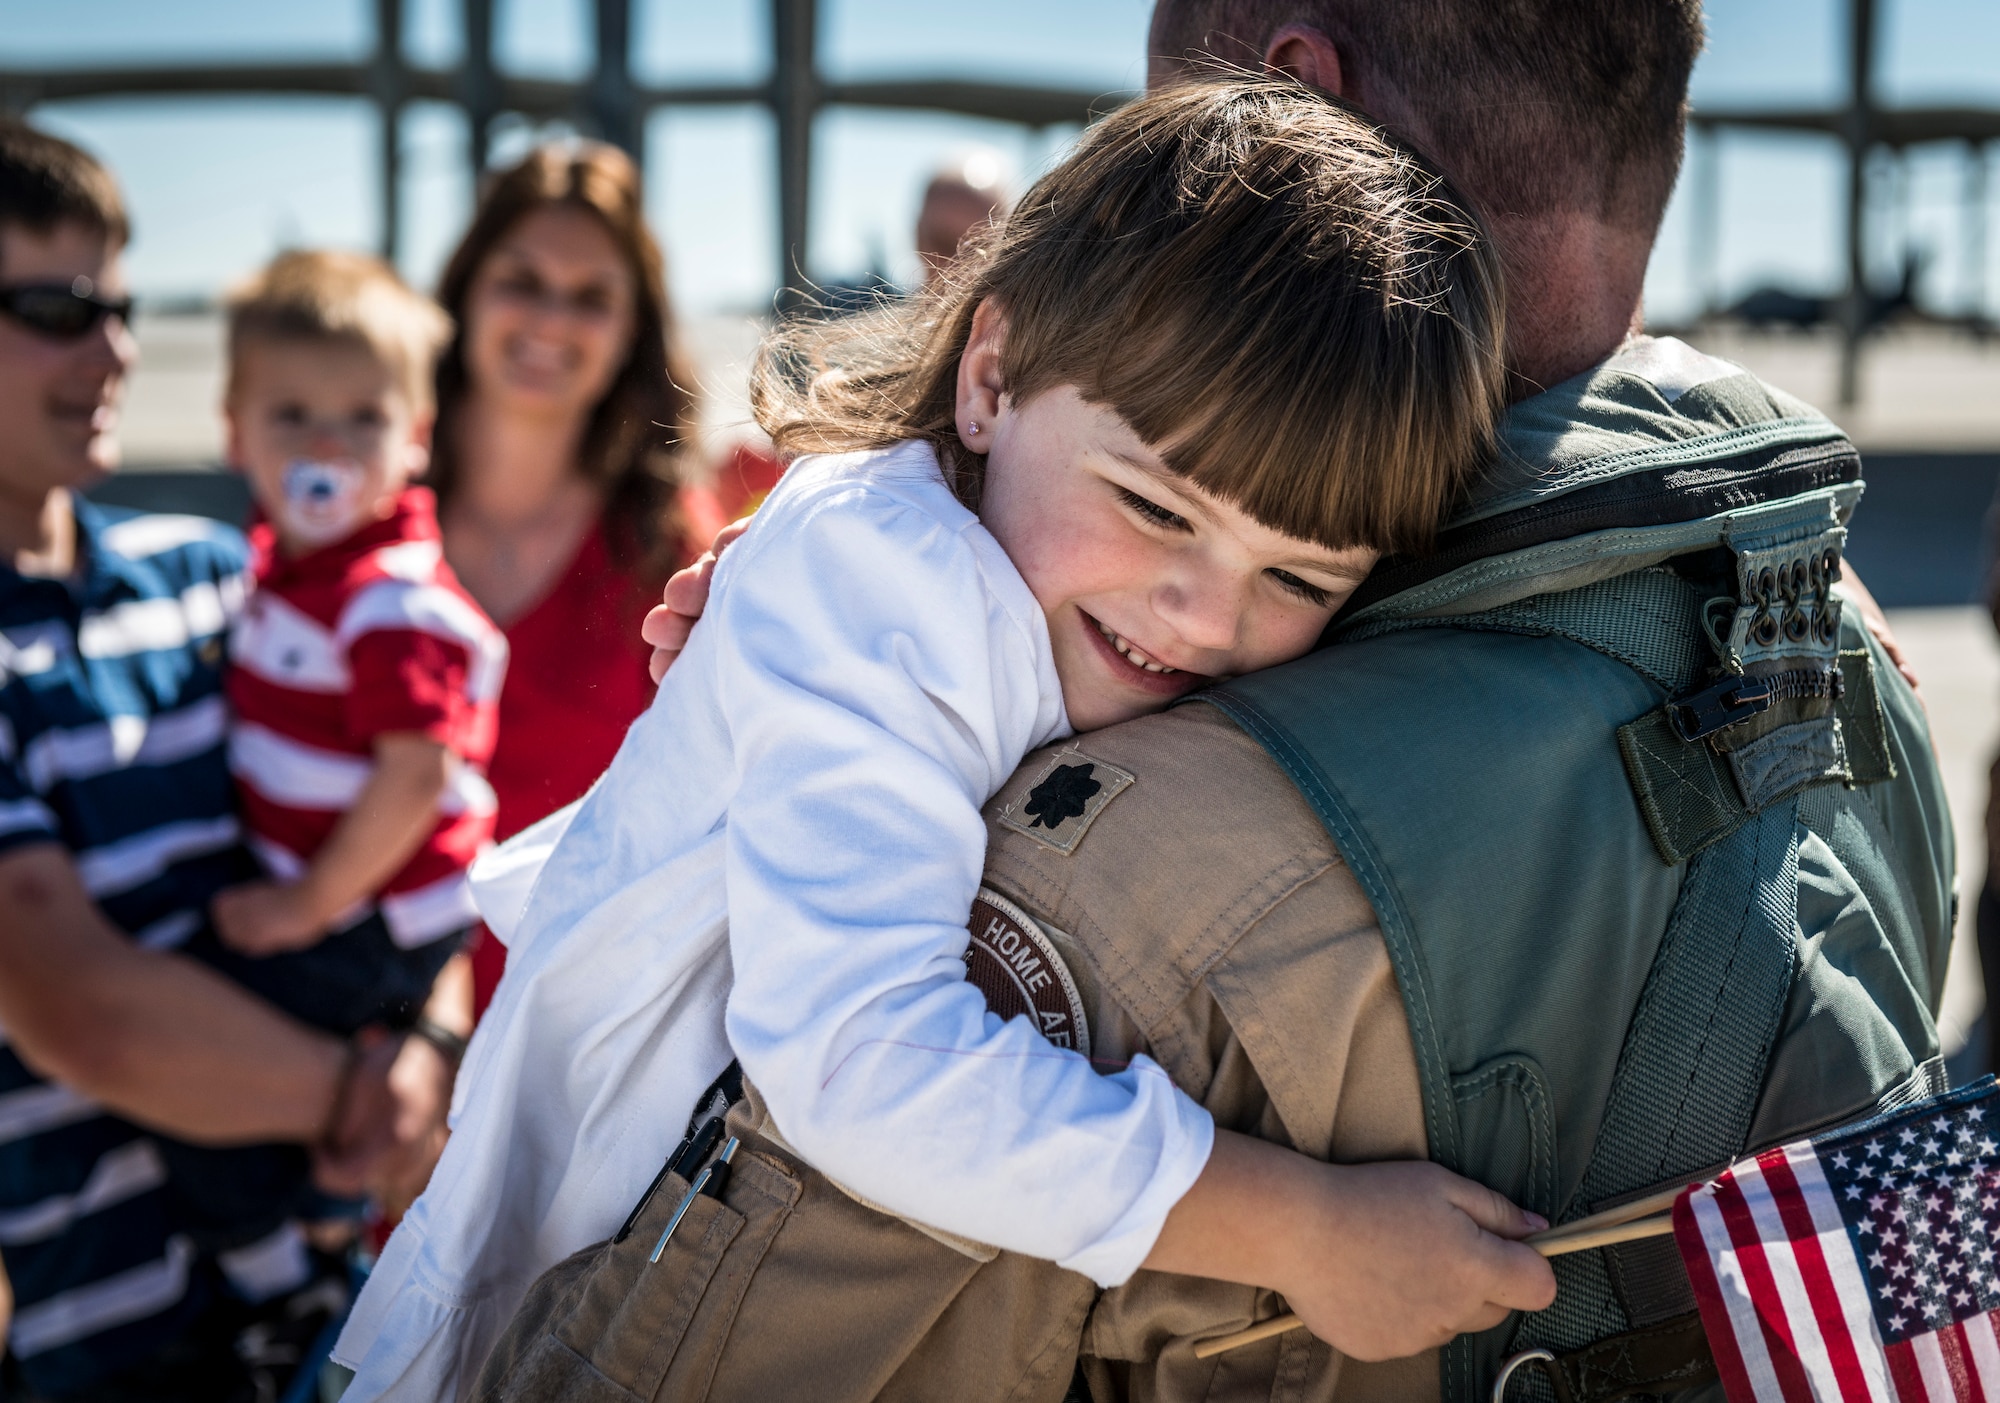 U.S. Air Force Lt. Col. Joel Meyers, 389th Fighter Squadron commander, embraces his daughter for the first time during a homecoming event welcoming the 389th Fighter Squadron back from its deployment to Southwest Asia at Mountain Home Air Force Base, Idaho, Oct. 5, 2013. (U.S. Air Force photo by Tech. Sgt. Samuel Morse/RELEASED)